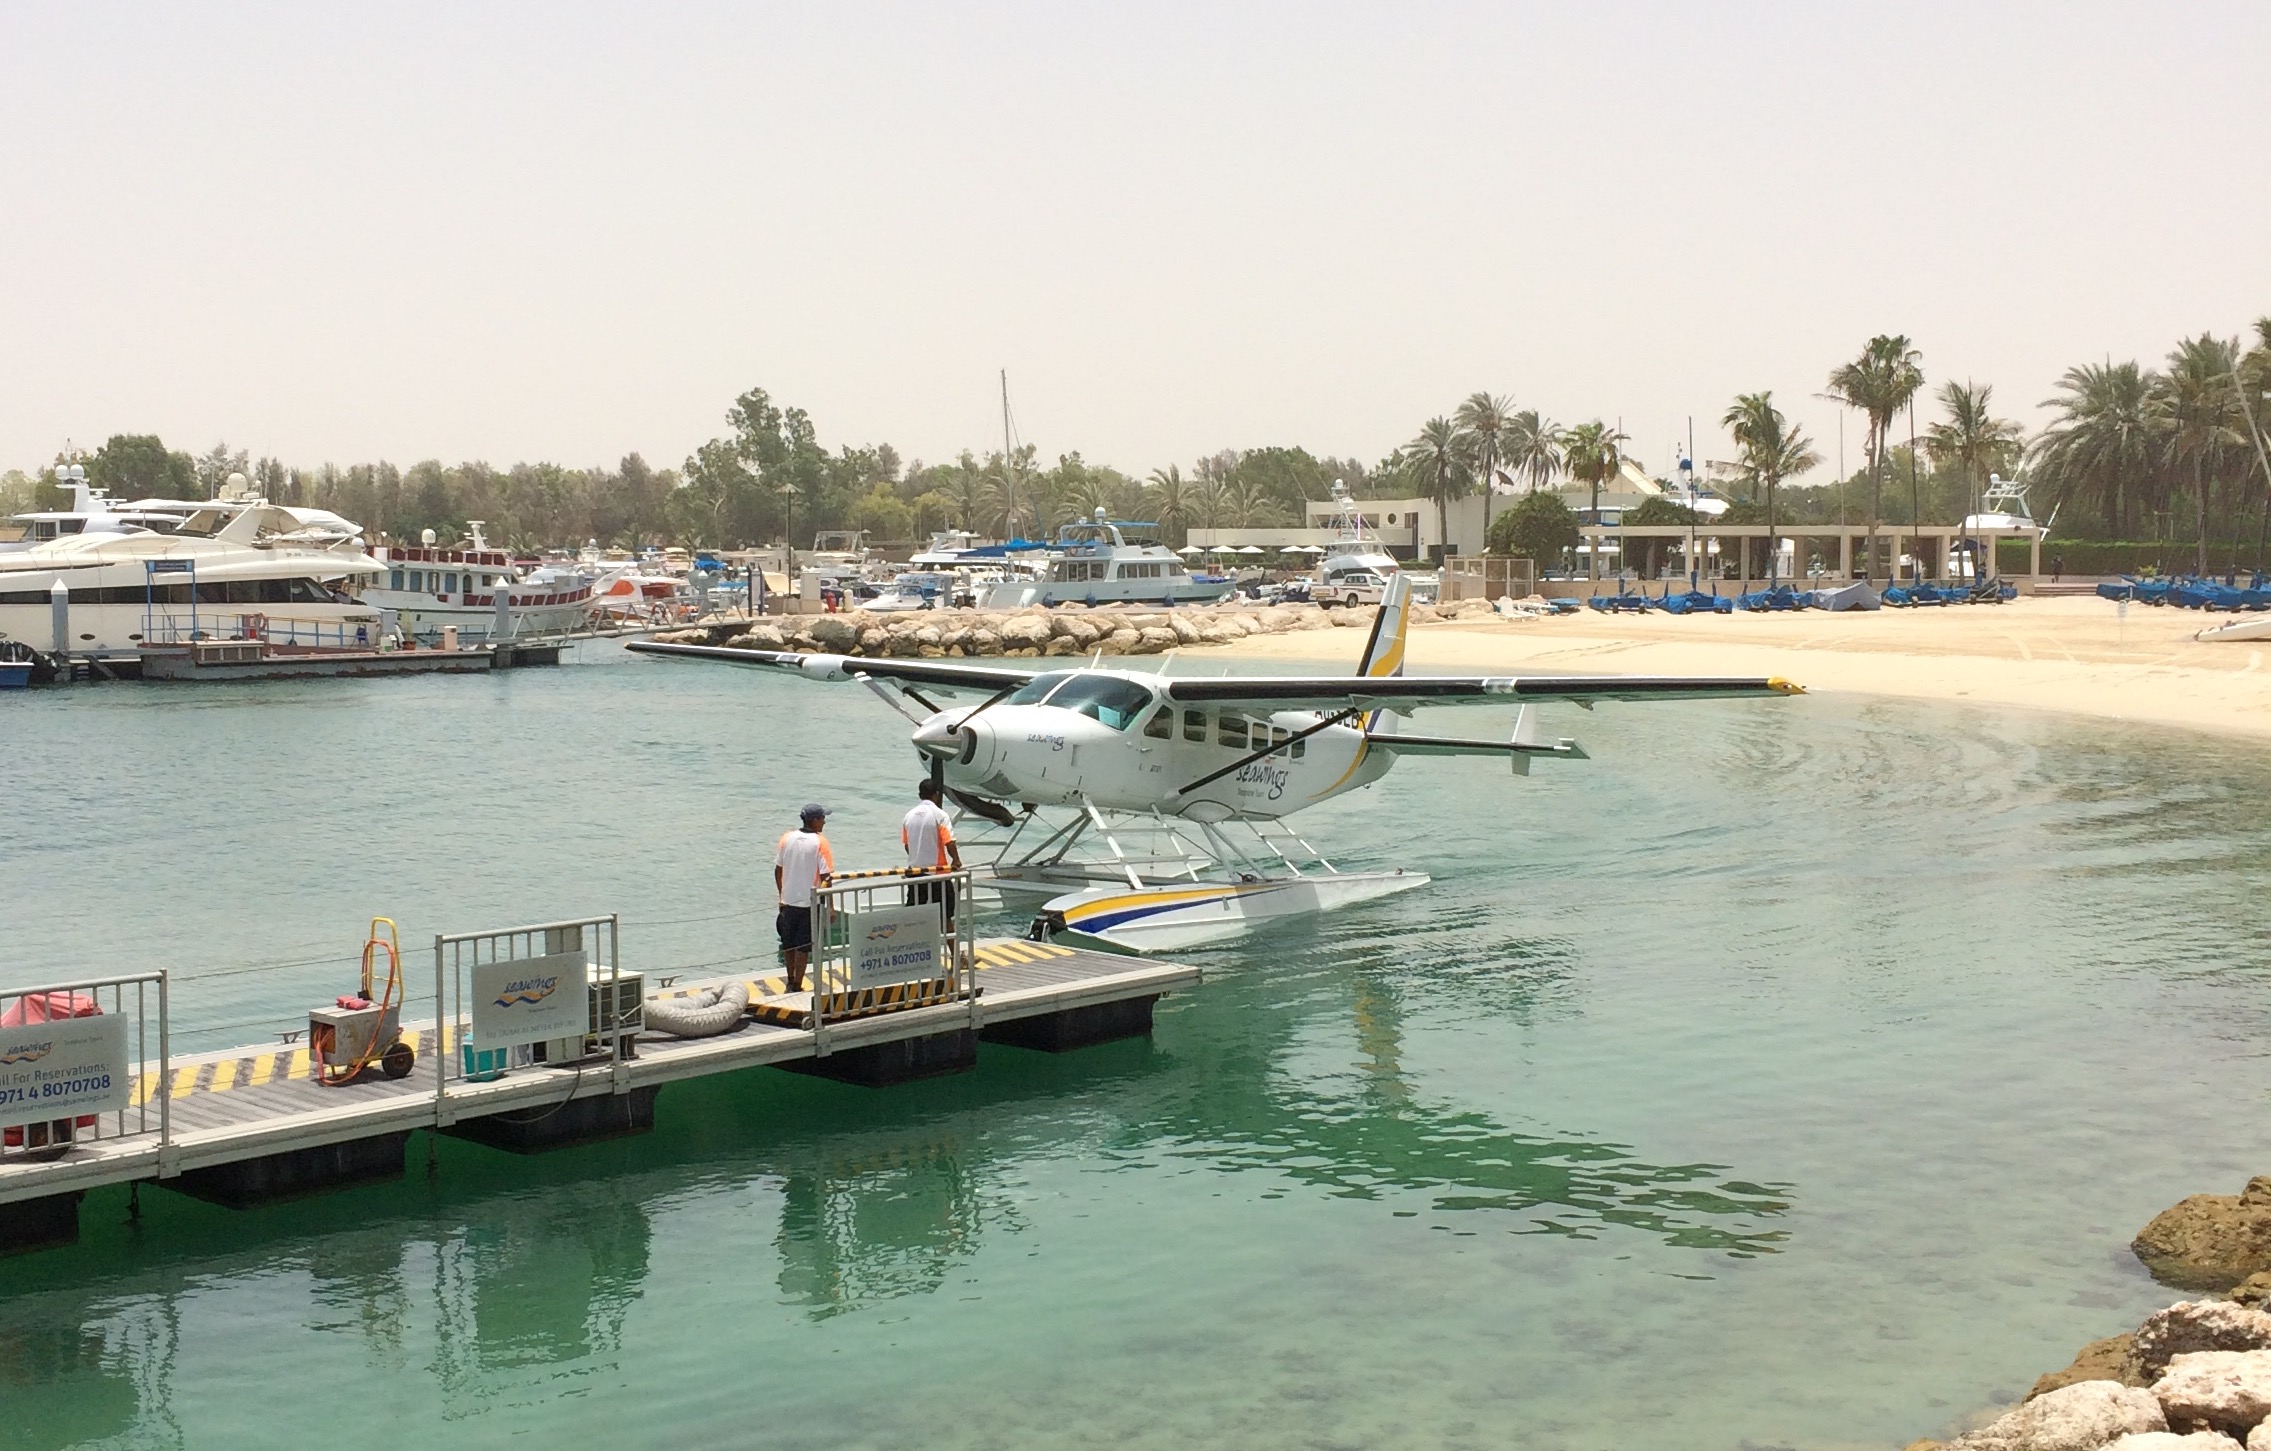 The Jetty watching the seaplane taxi in